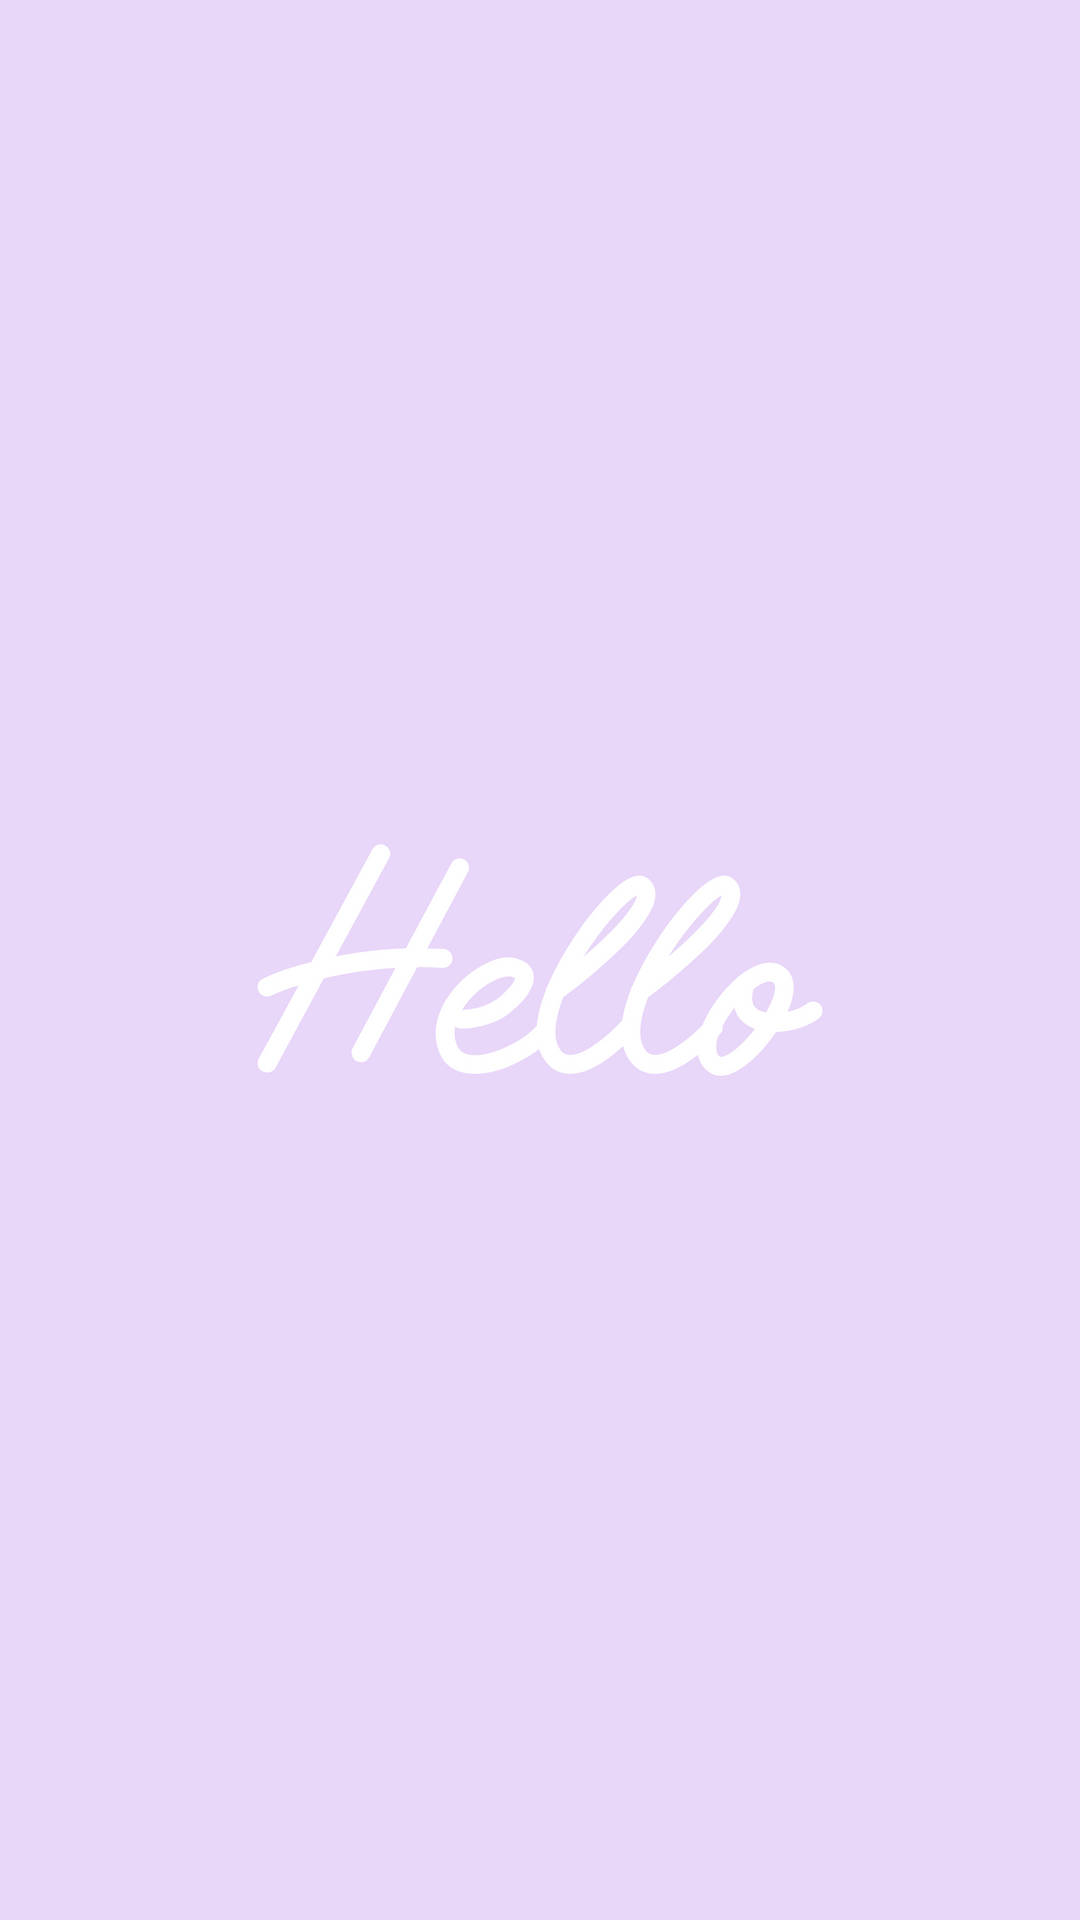 Heylila Pastell Minimalistisch (for A Computer Or Mobile Wallpaper) Wallpaper